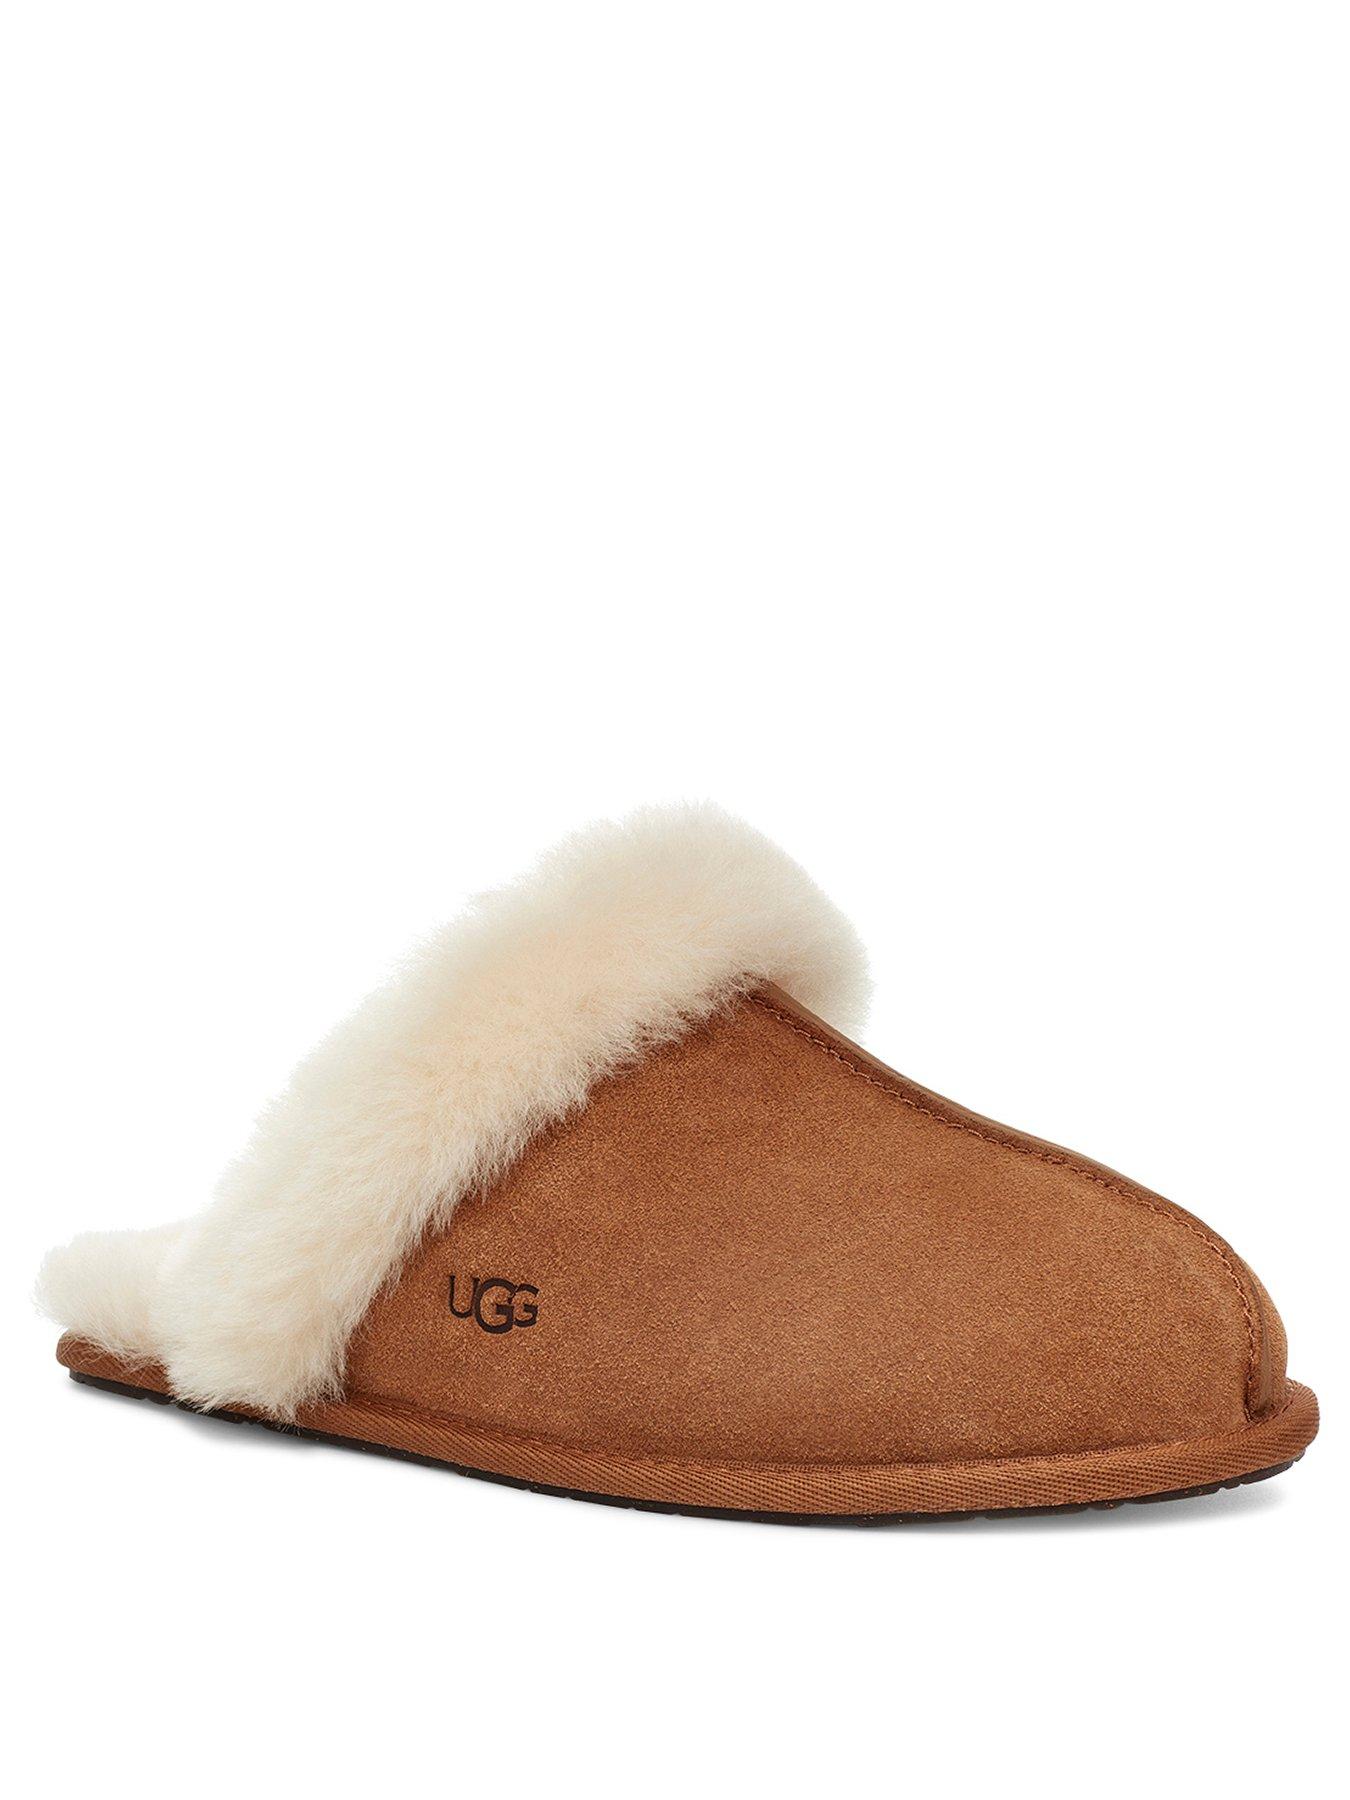 ugg bailey button boots on sale